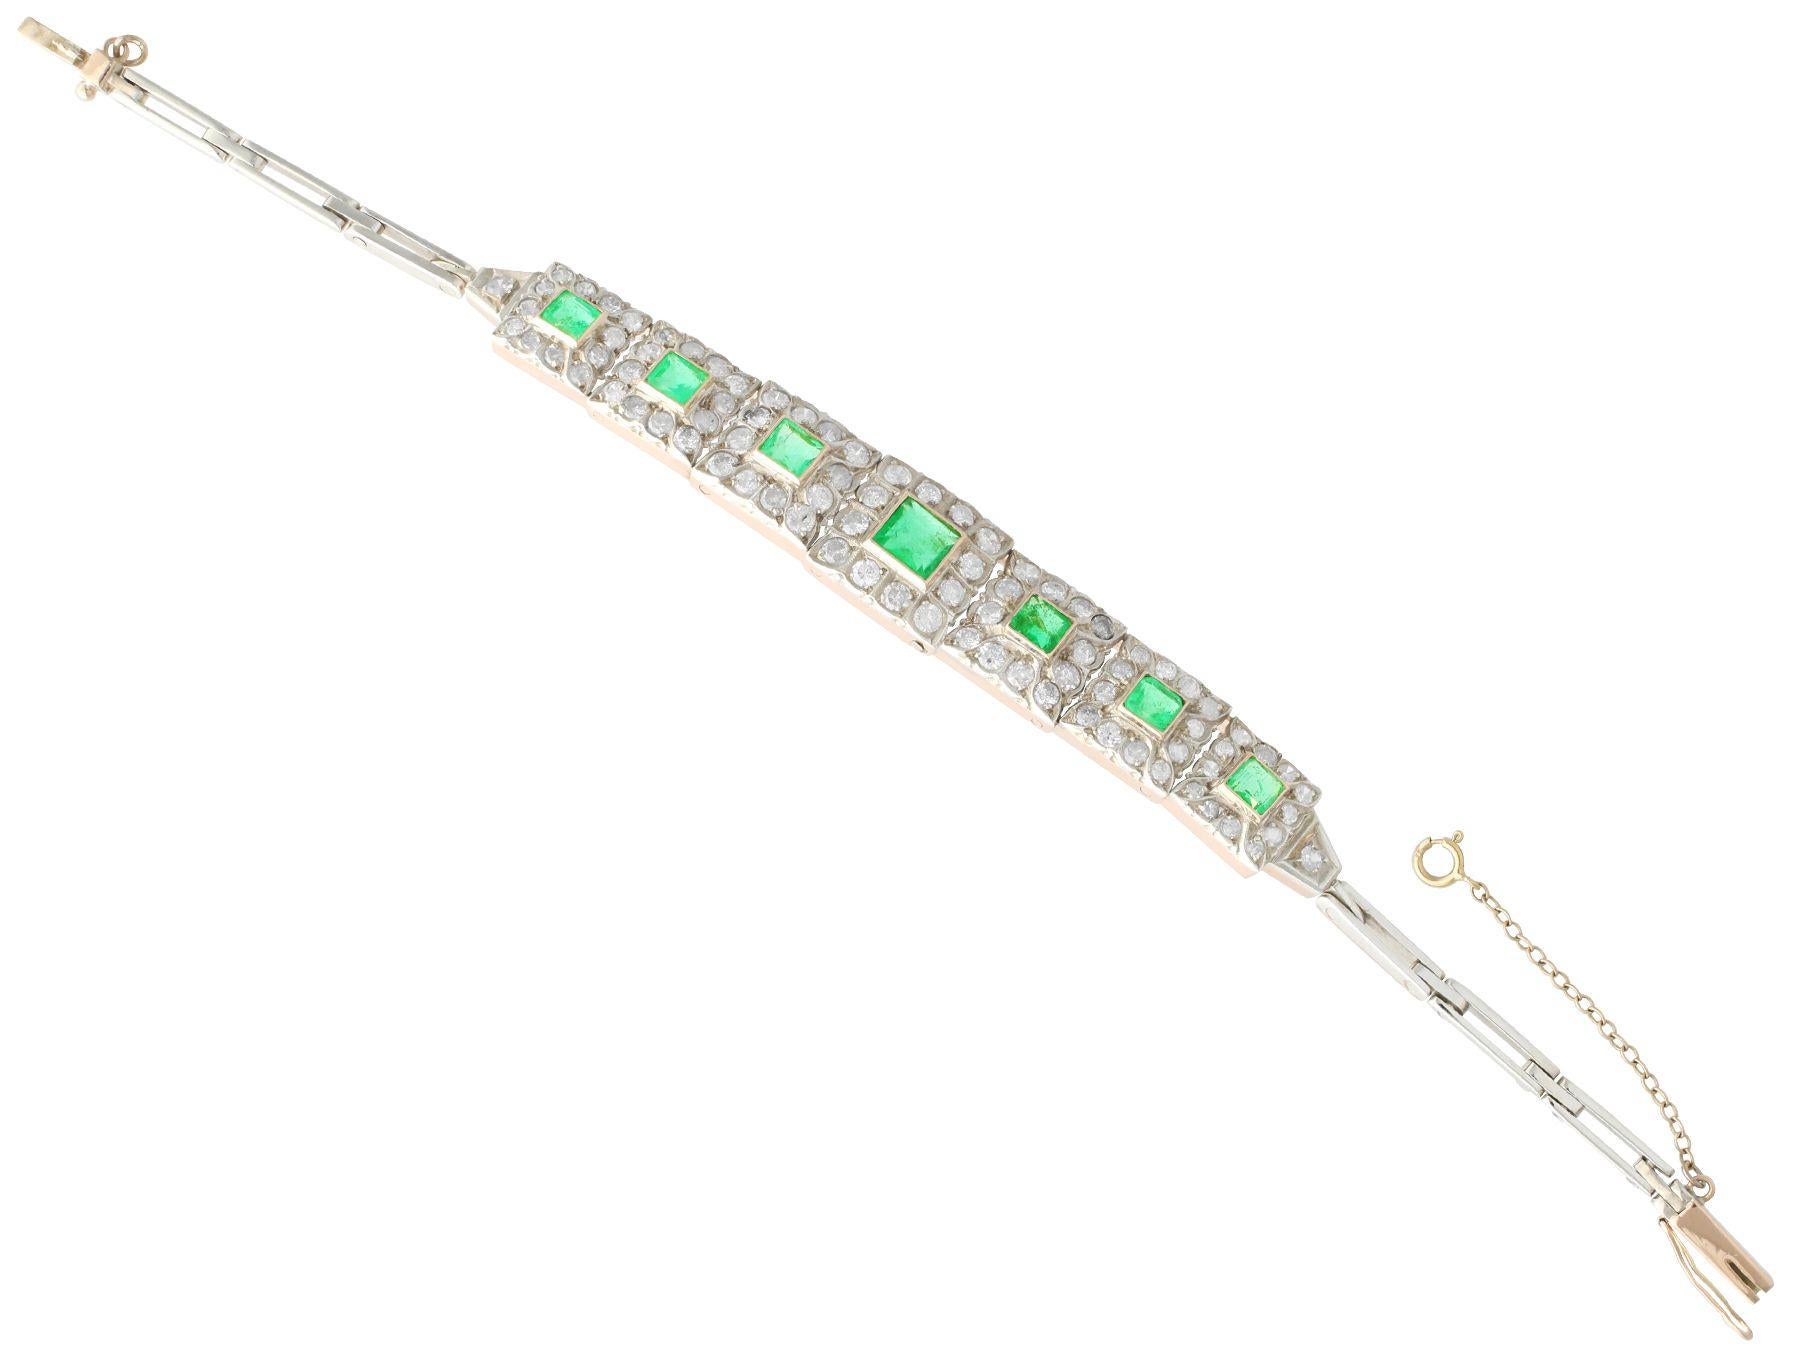 Antique 2.92ct Emerald and 4.05ct Diamond 9k Rose Gold Bracelet, circa 1910 In Excellent Condition For Sale In Jesmond, Newcastle Upon Tyne